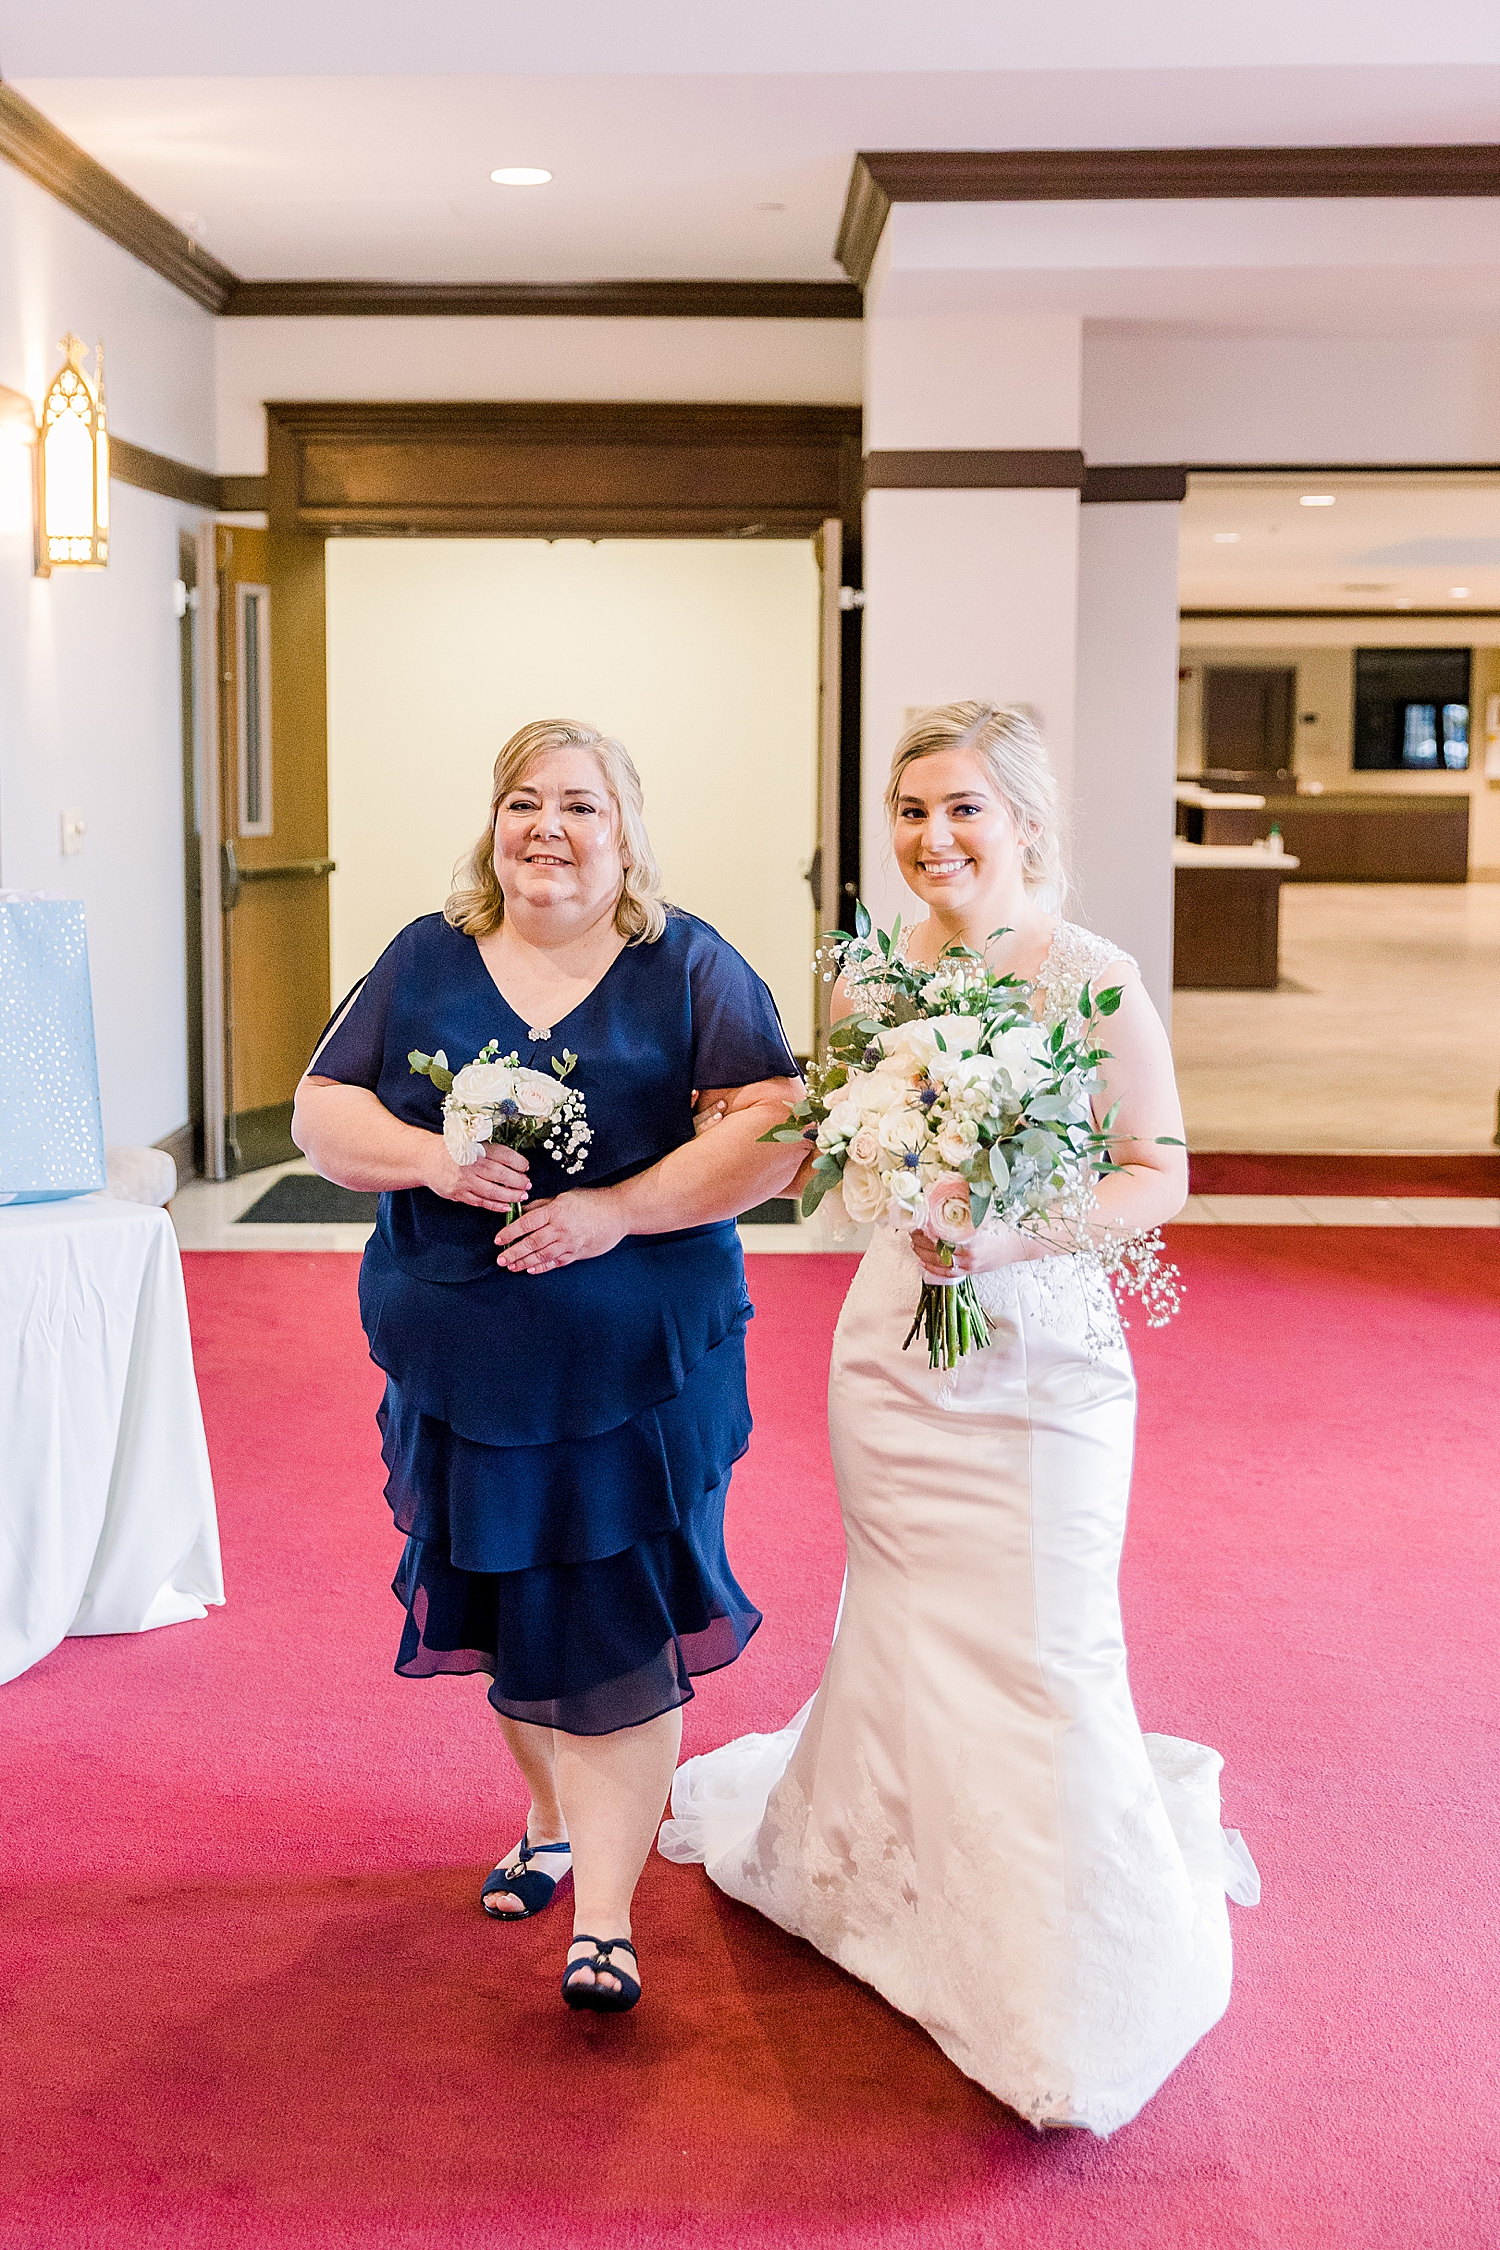 mother walks bride down aisle during traditional church wedding